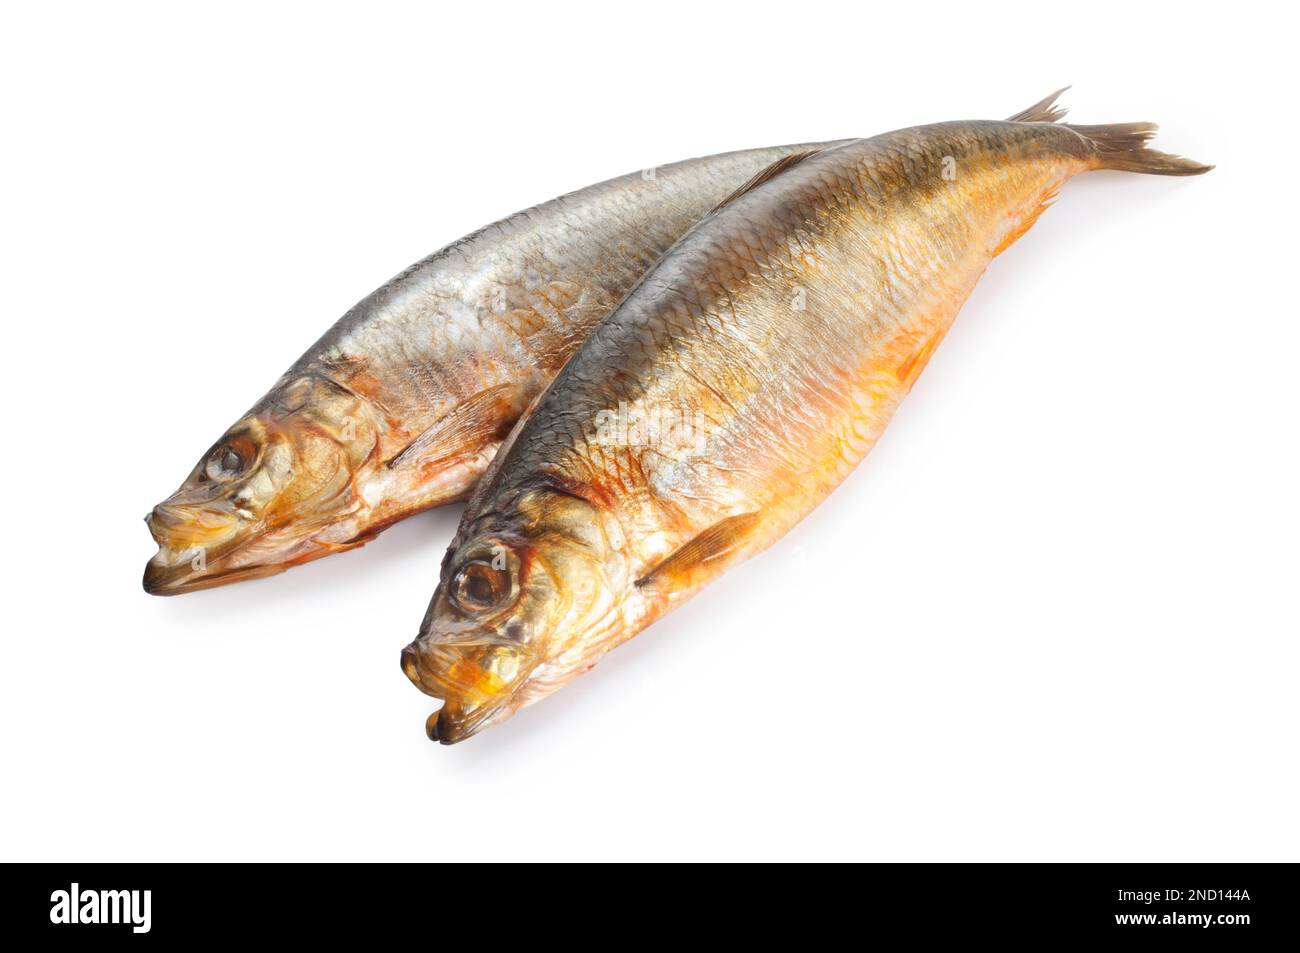 Studio shot of naturally smoked kippers cut out against a white background - John Gollop Stock Photo